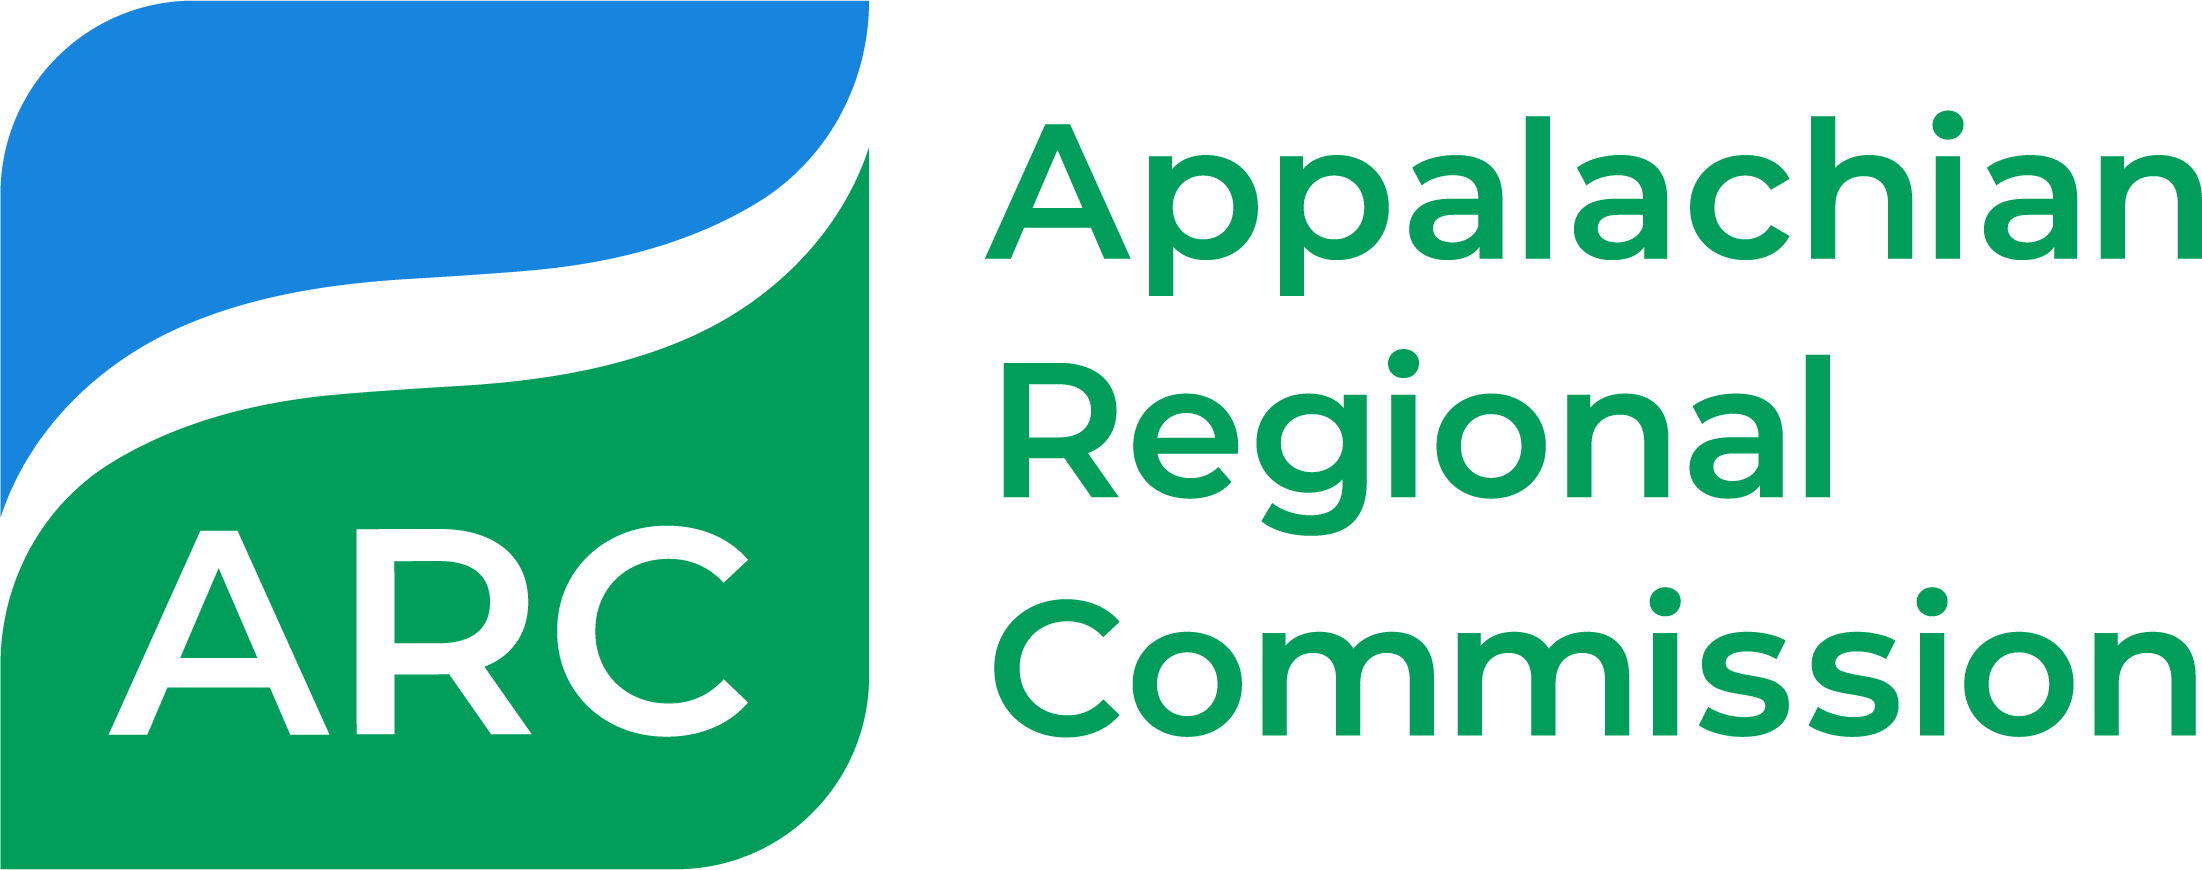 ARC Seeks Applicants for Economic Diversification Projects in Region’s Coal-Impacted Communities